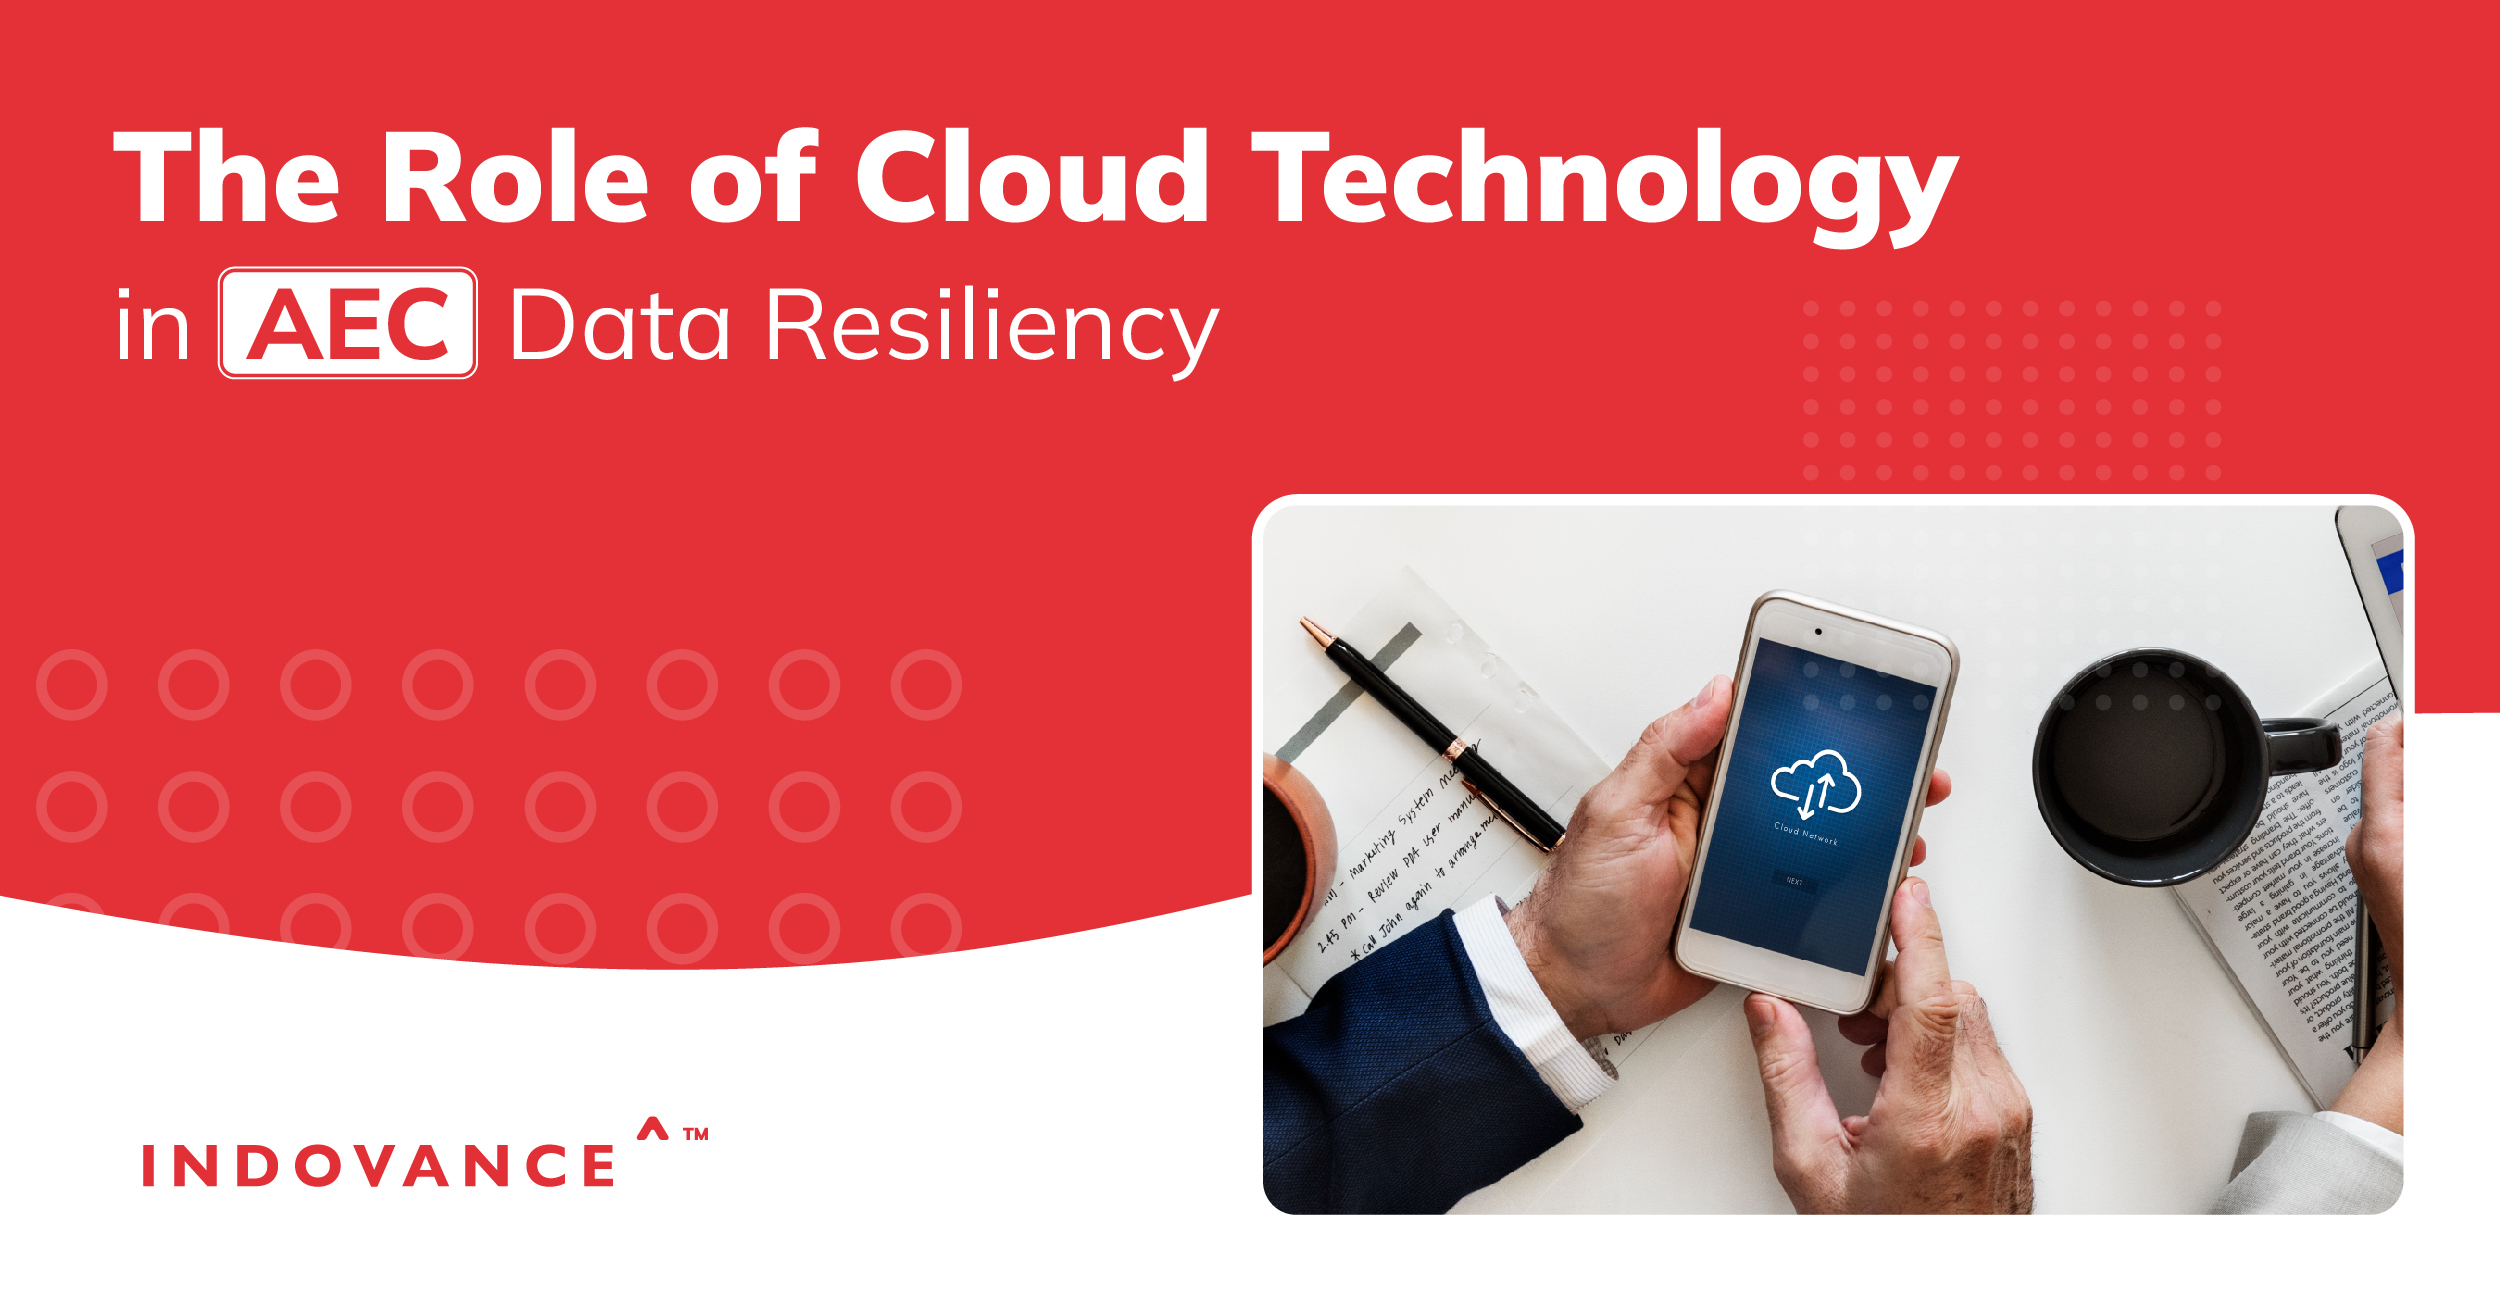 The Role of Cloud Technology in AEC Data Resiliency